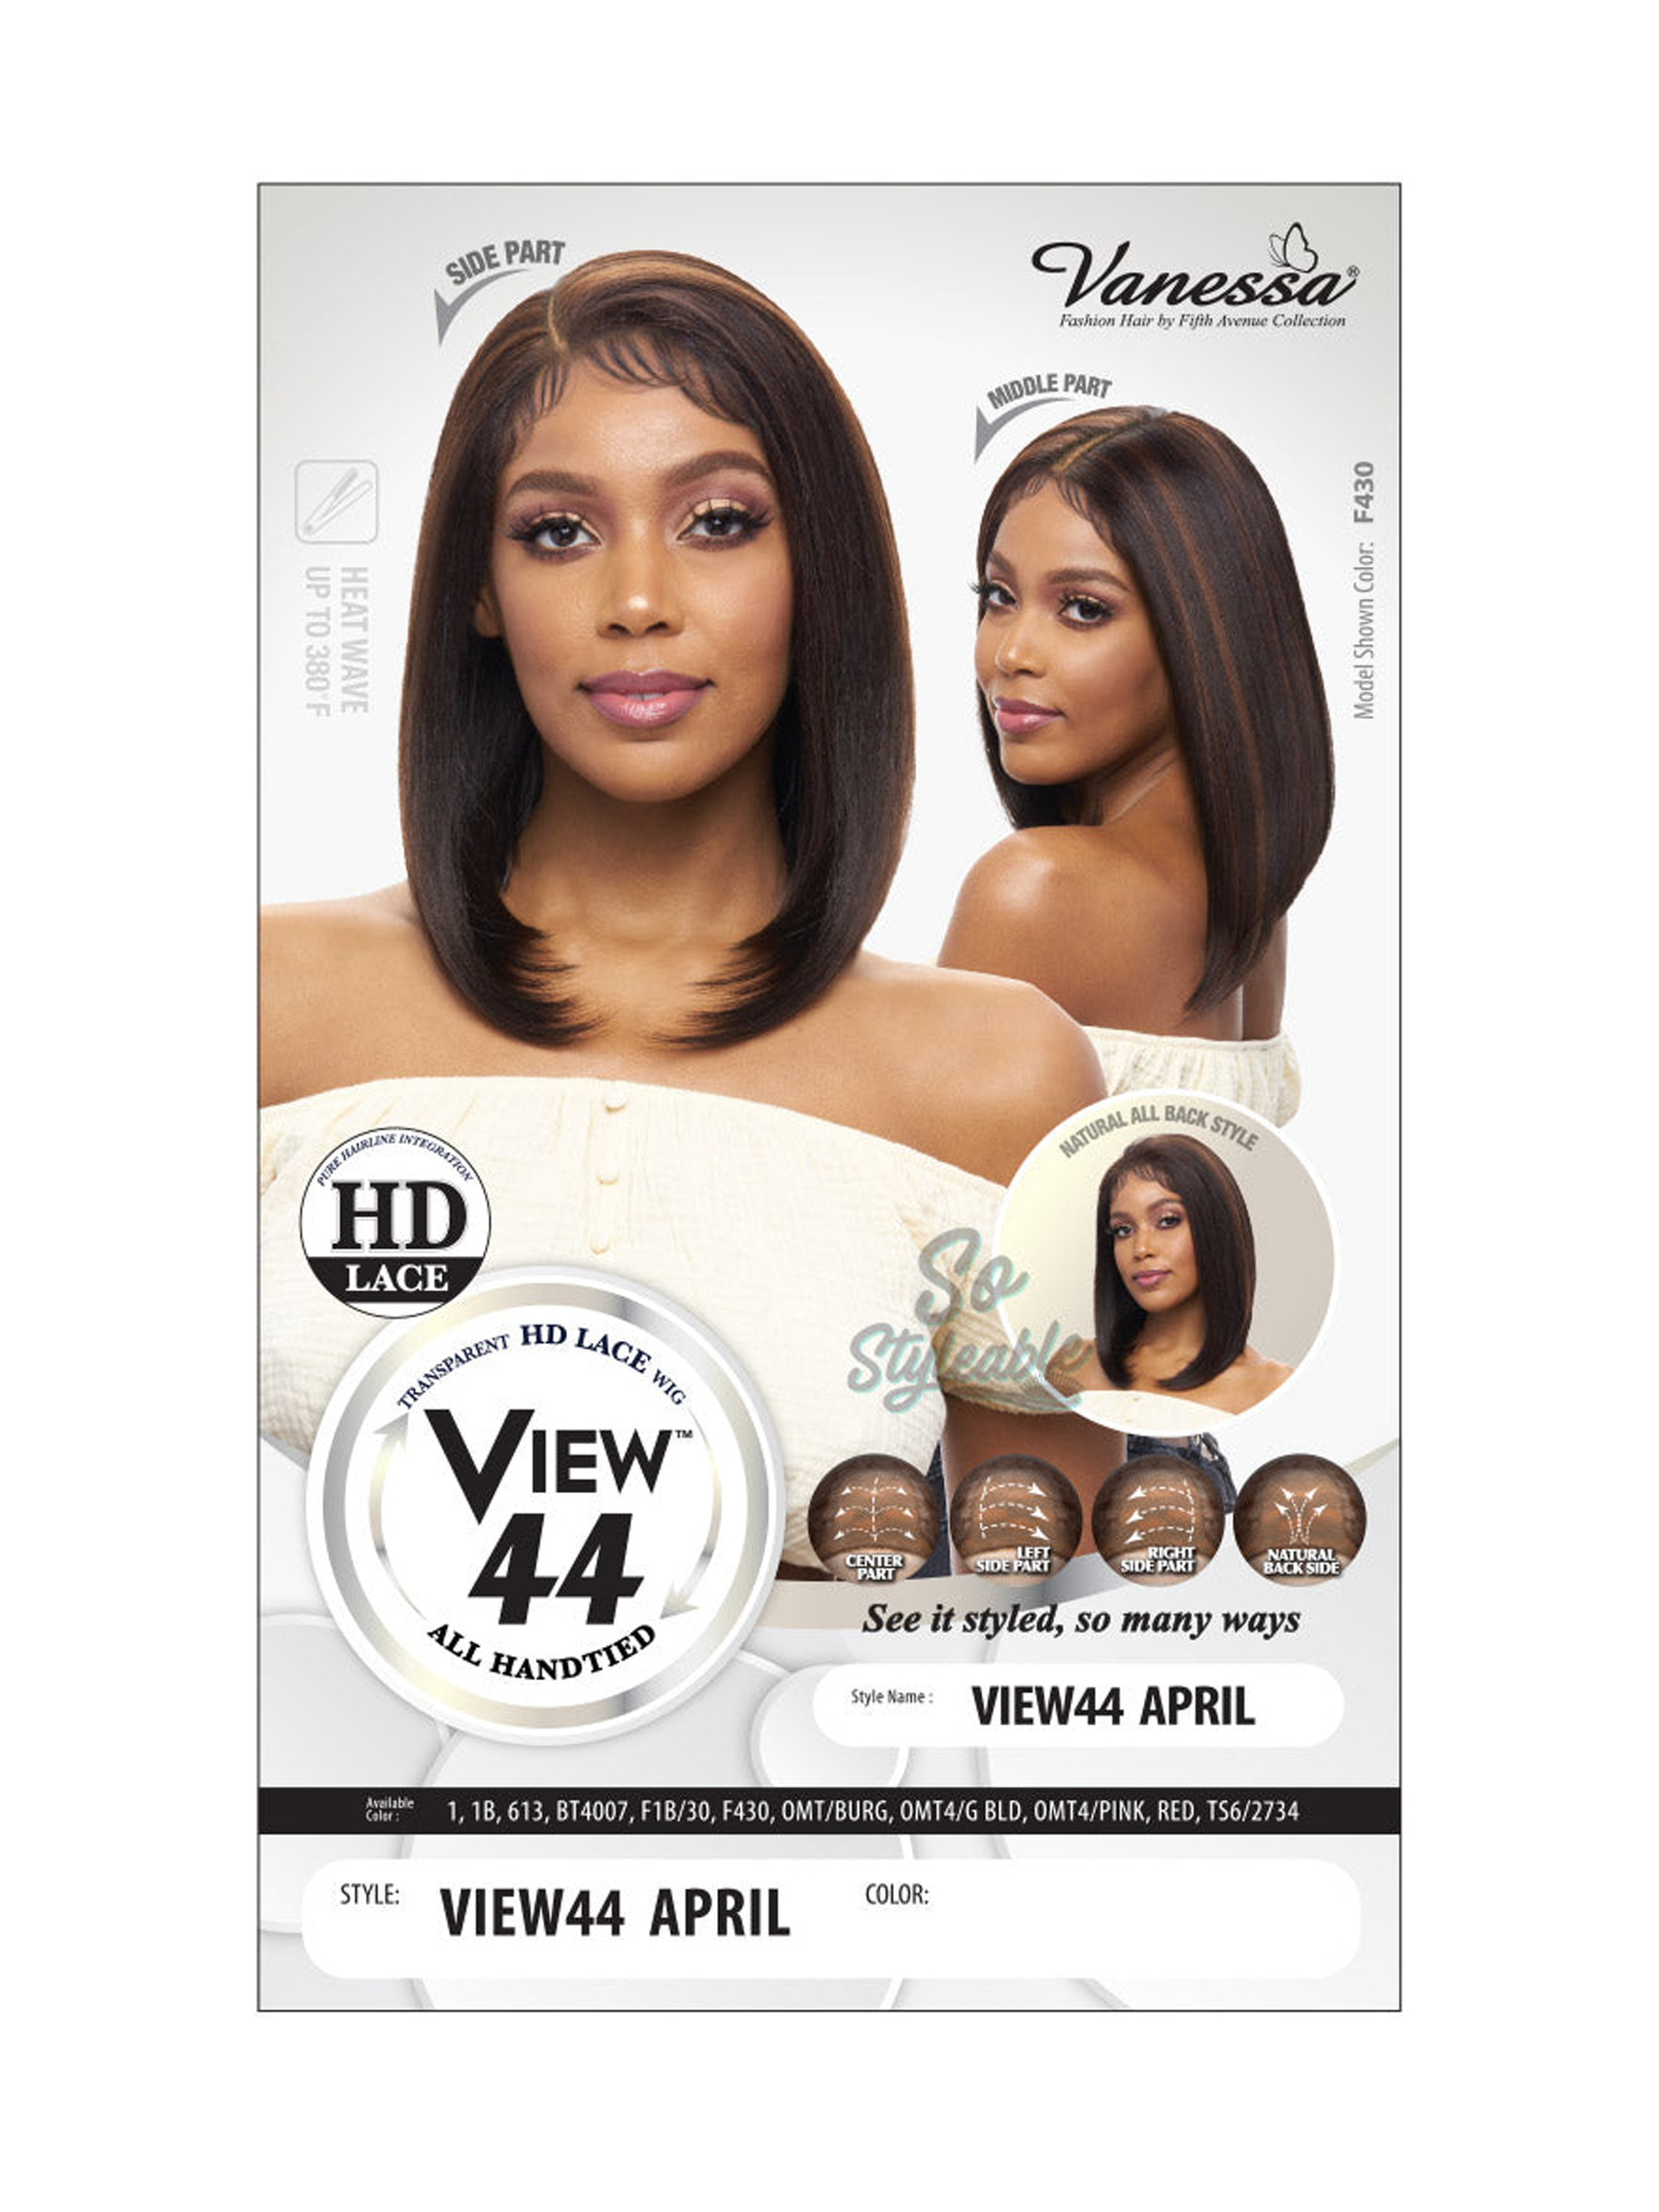 Vanessa Synthetic HD Lace Part Wig View44 April